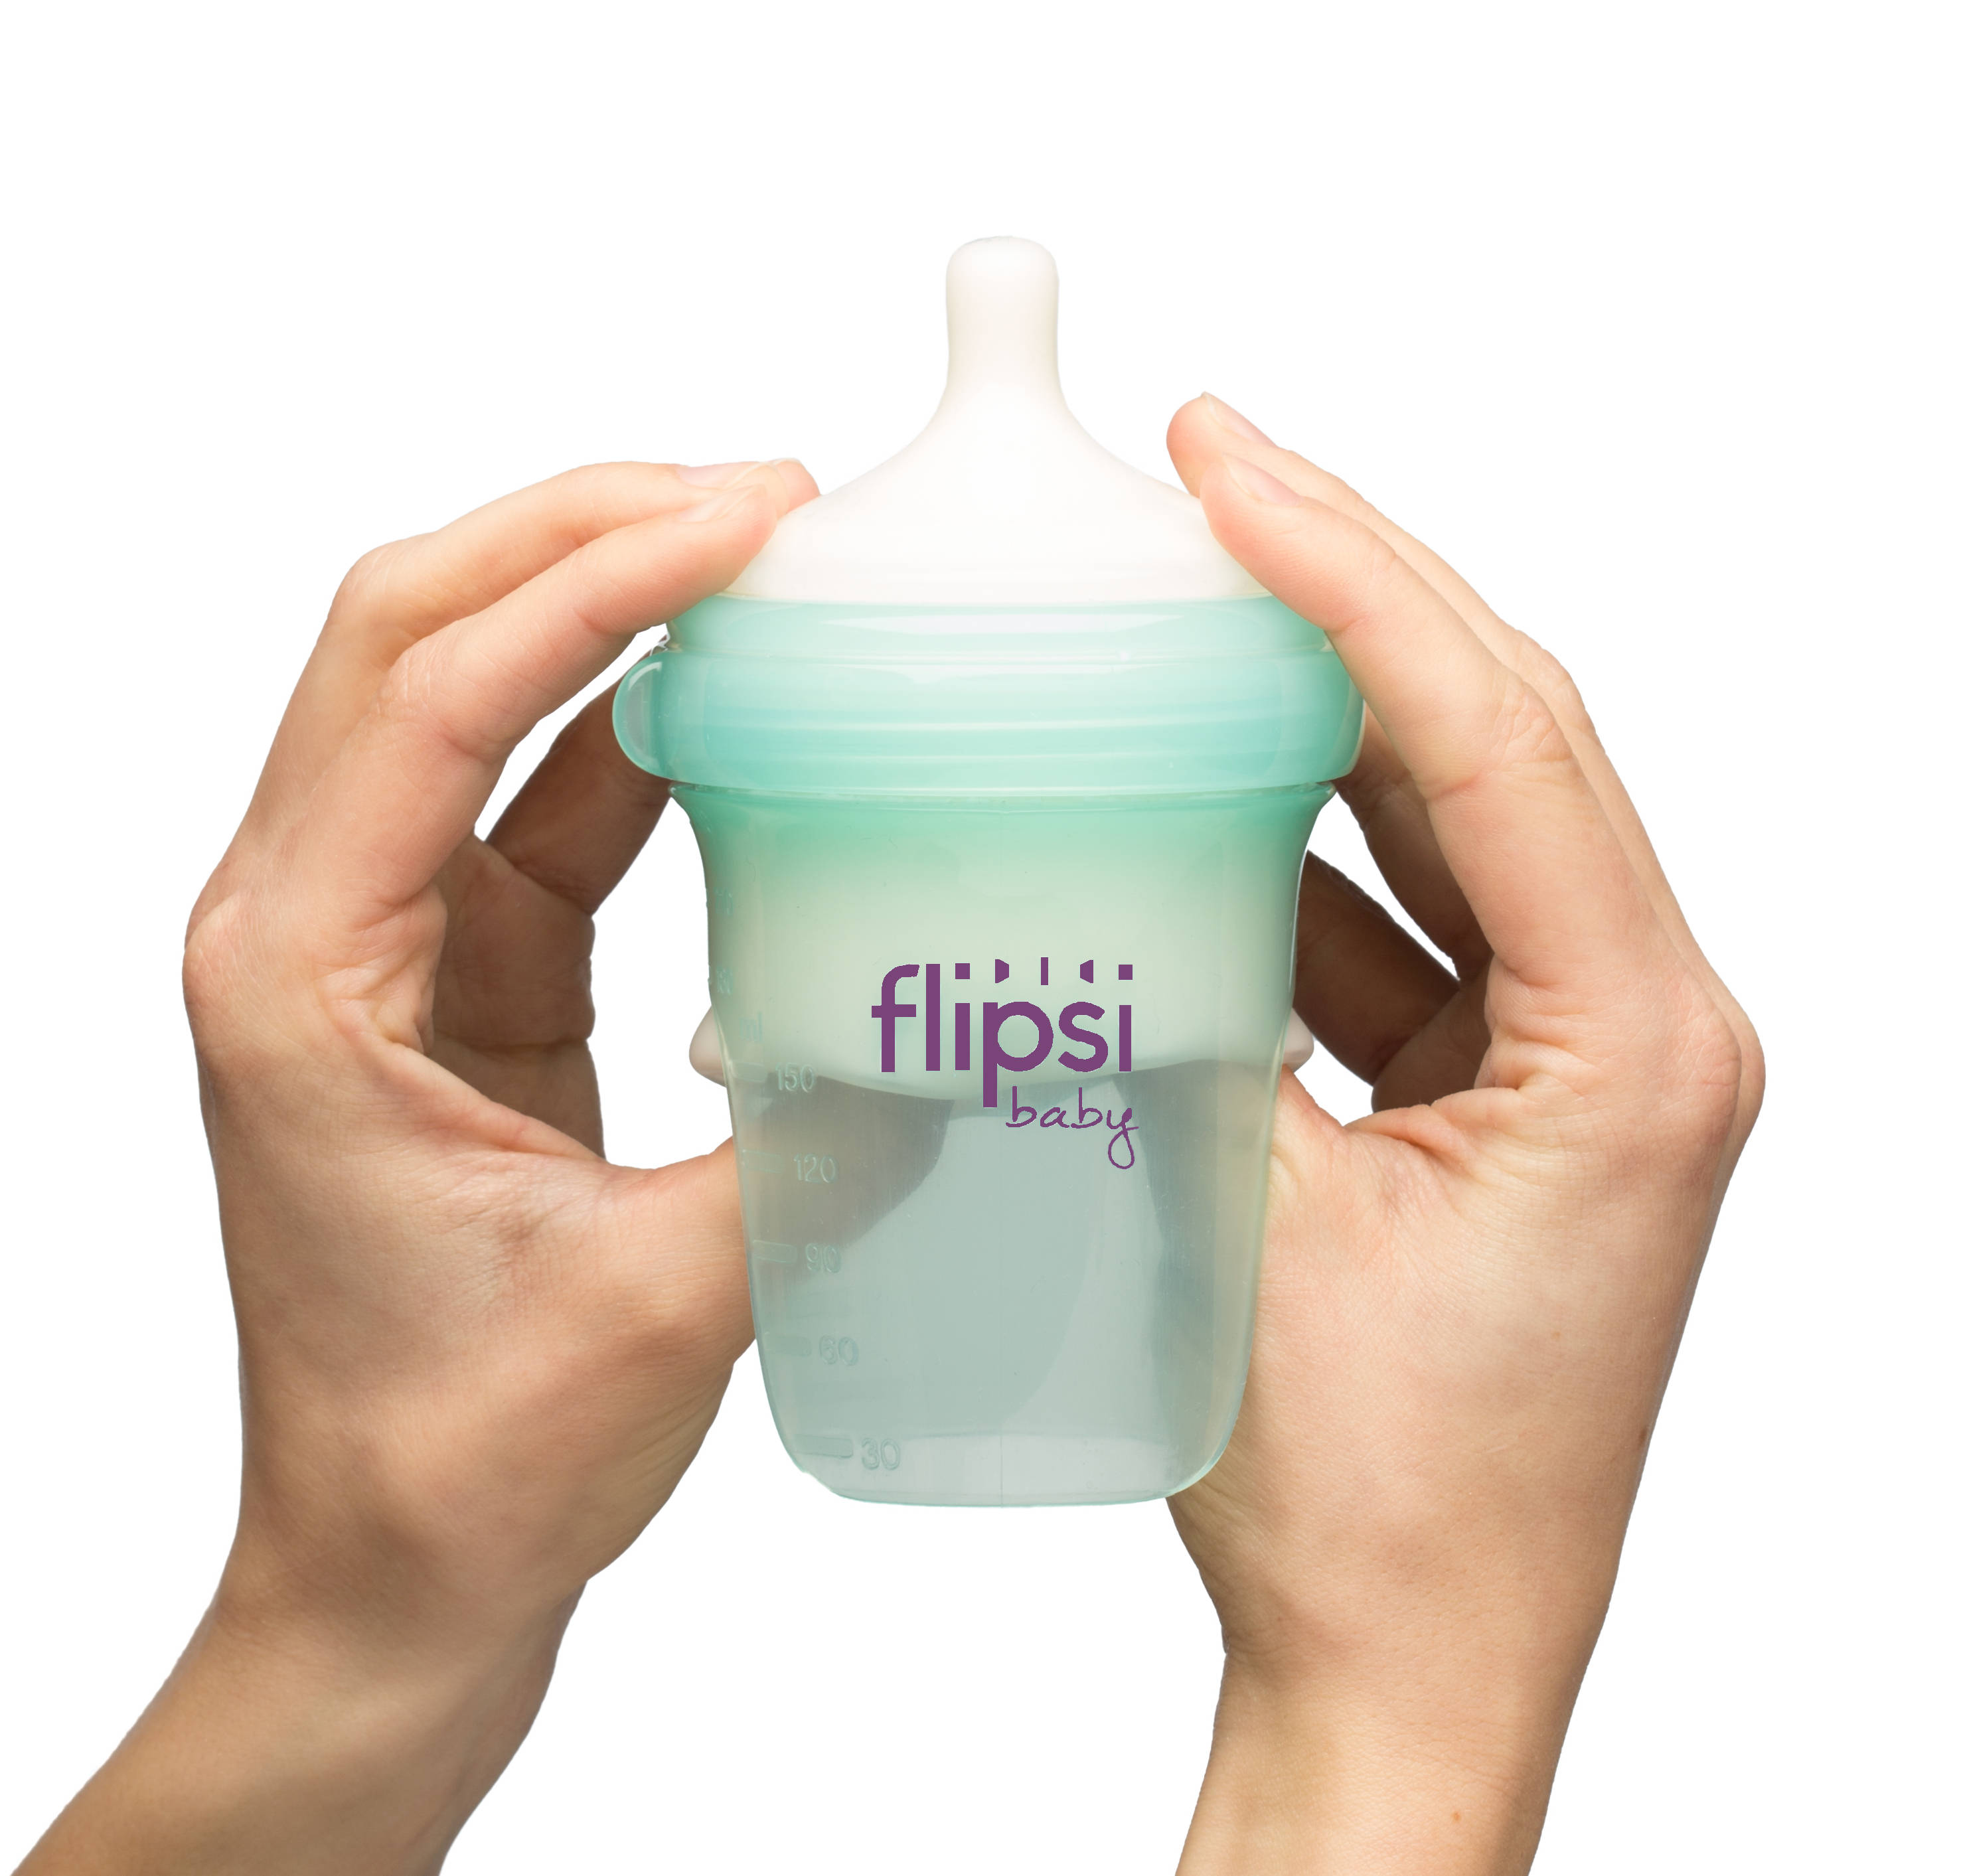 The flexible silicone sides collapse inward during feeding to minimize air intake which can help prevent colic.